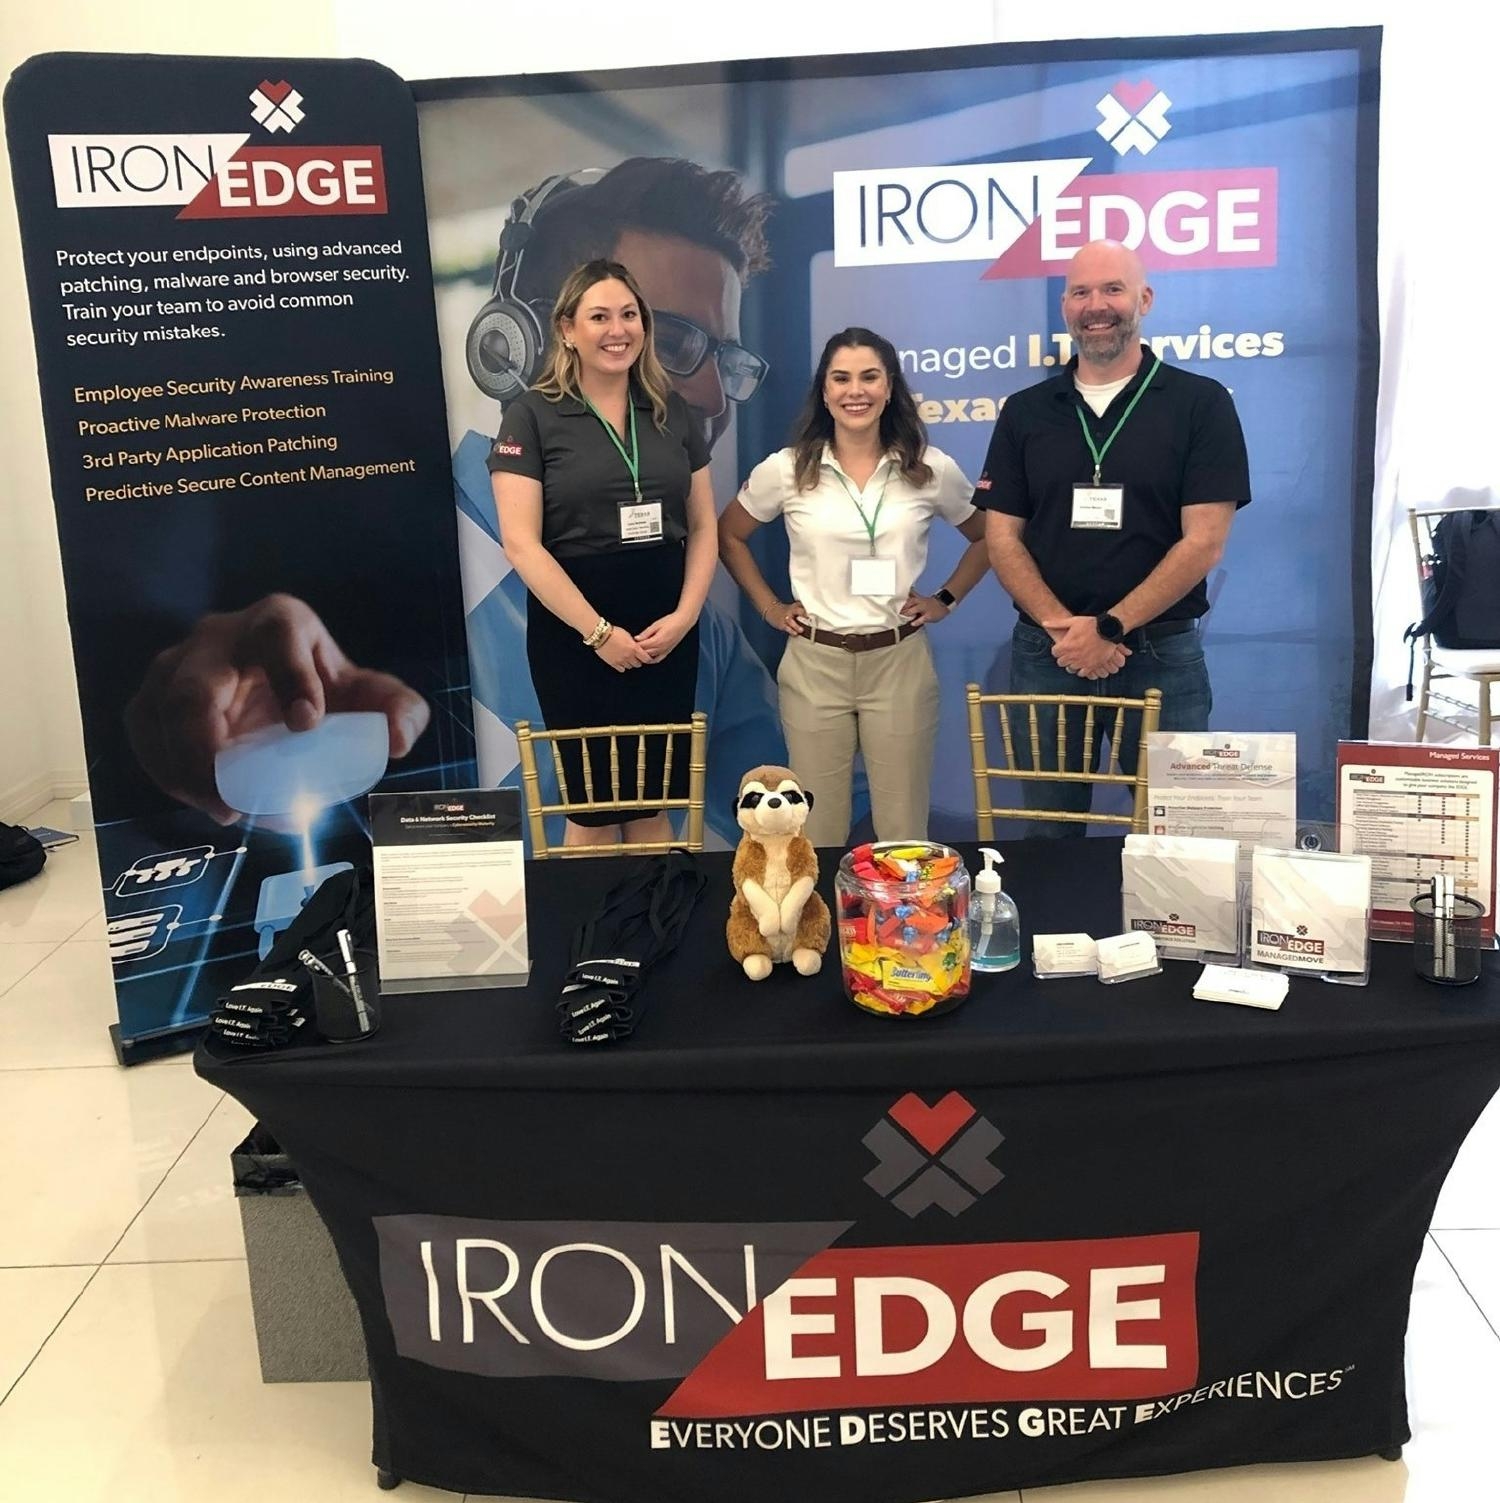 The IronEdge team is always eager to meet new people at industry events.  